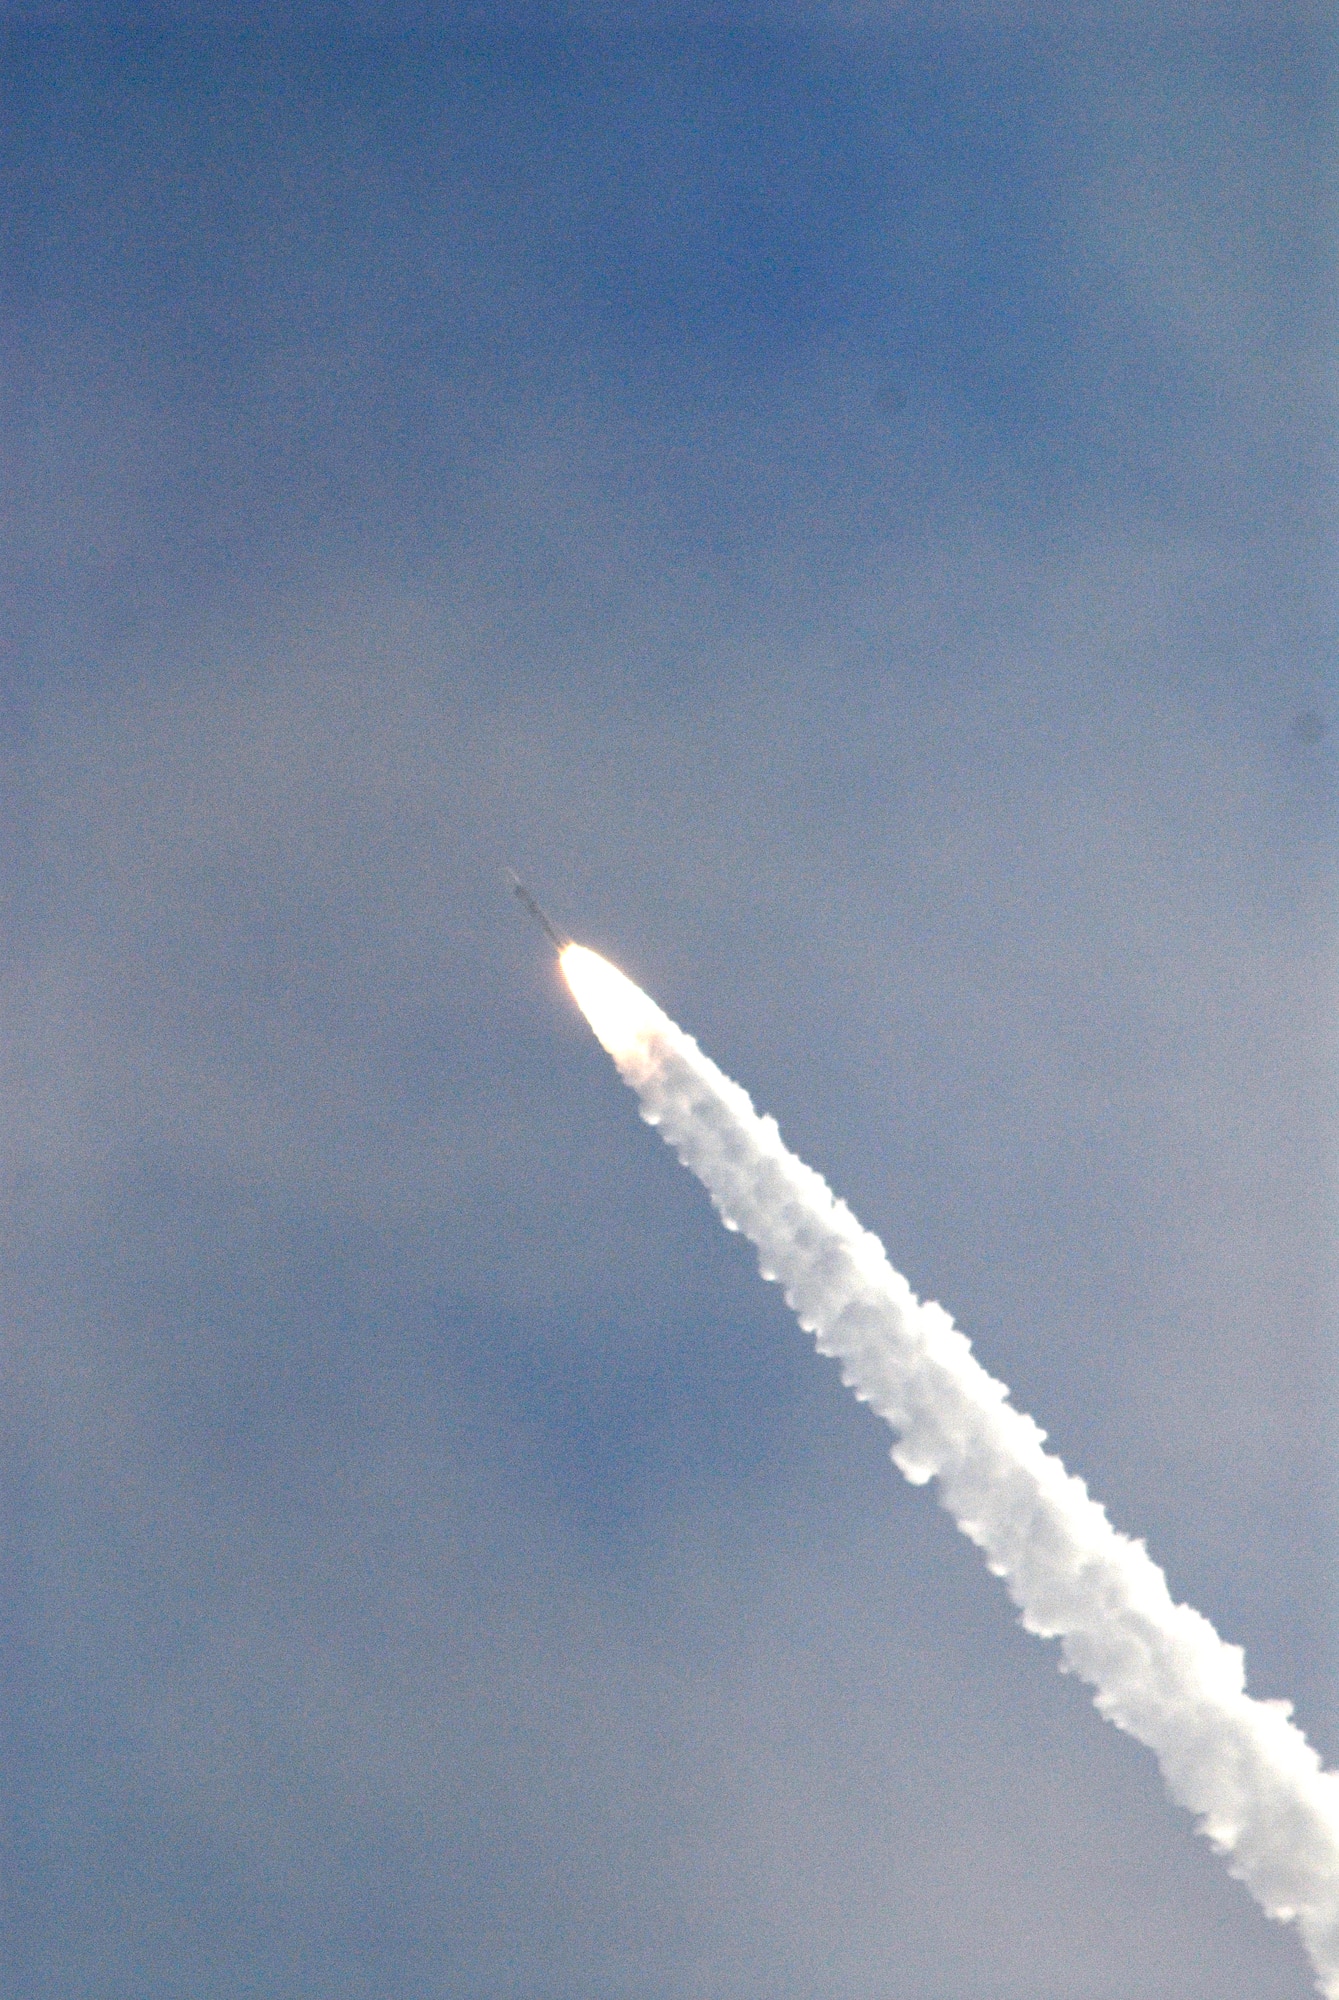 A Delta II rocket carrying the Thales Alenia-Space COSMO-SkyMed Satellite flies from Vandenberg Air Force Base, Calif., at 7:34 p.m. Thursday. The rocket, first of two COSMO-SkyMed launches scheduled from Vandenberg, took off from Space Launch Complex-2. The Delta II is an expendable launch, medium-lift vehicle. It carries civil and commercial payloads into low-earth, polar, geosynchronous transfer and stationary orbits. (U.S. Air Force photo/Matthew Plew)